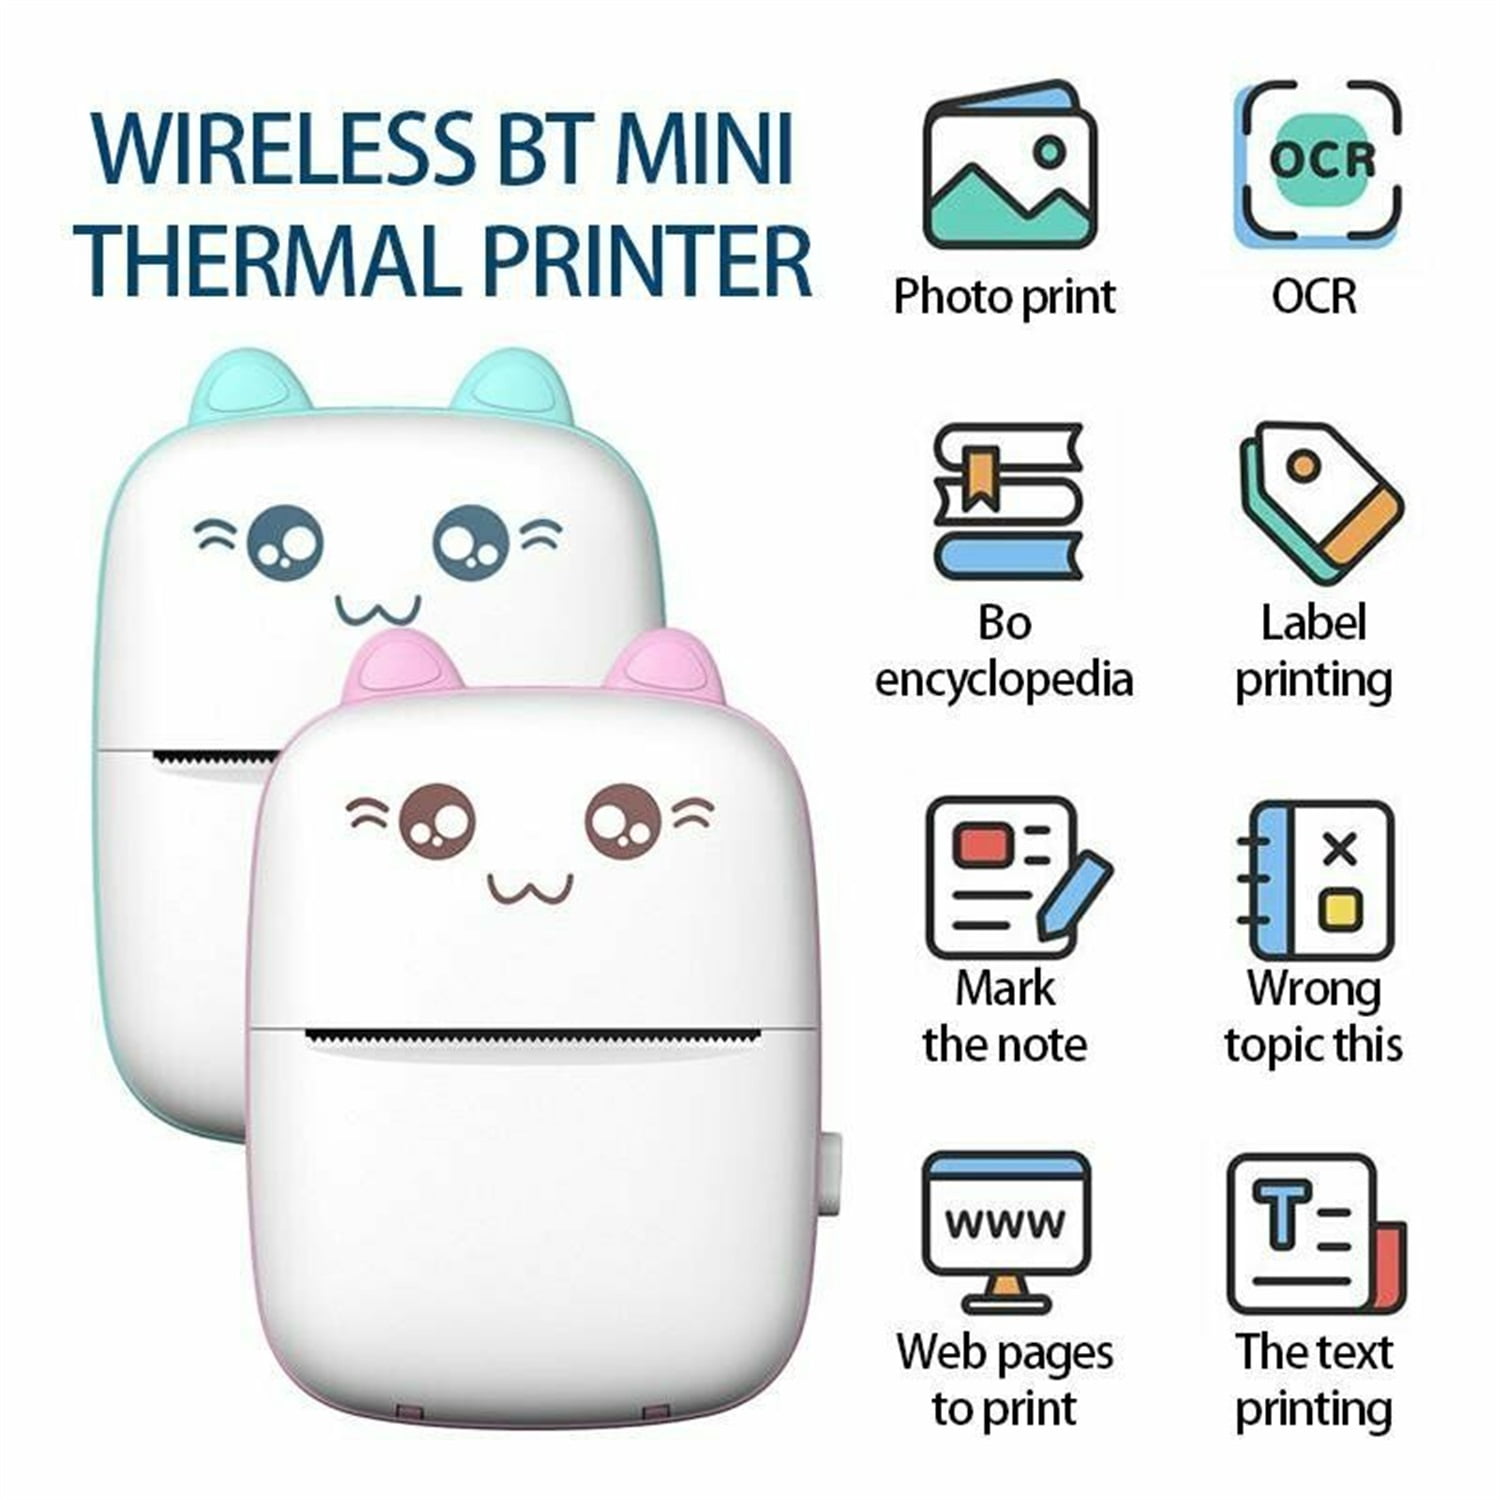 Journal P1-White Pocket Printer Mini Mobile Printers Bluetooth Wireless Portable Thermal Printer Compatible with iOS and Android for Learning Assistance Work,Notes, Fun 